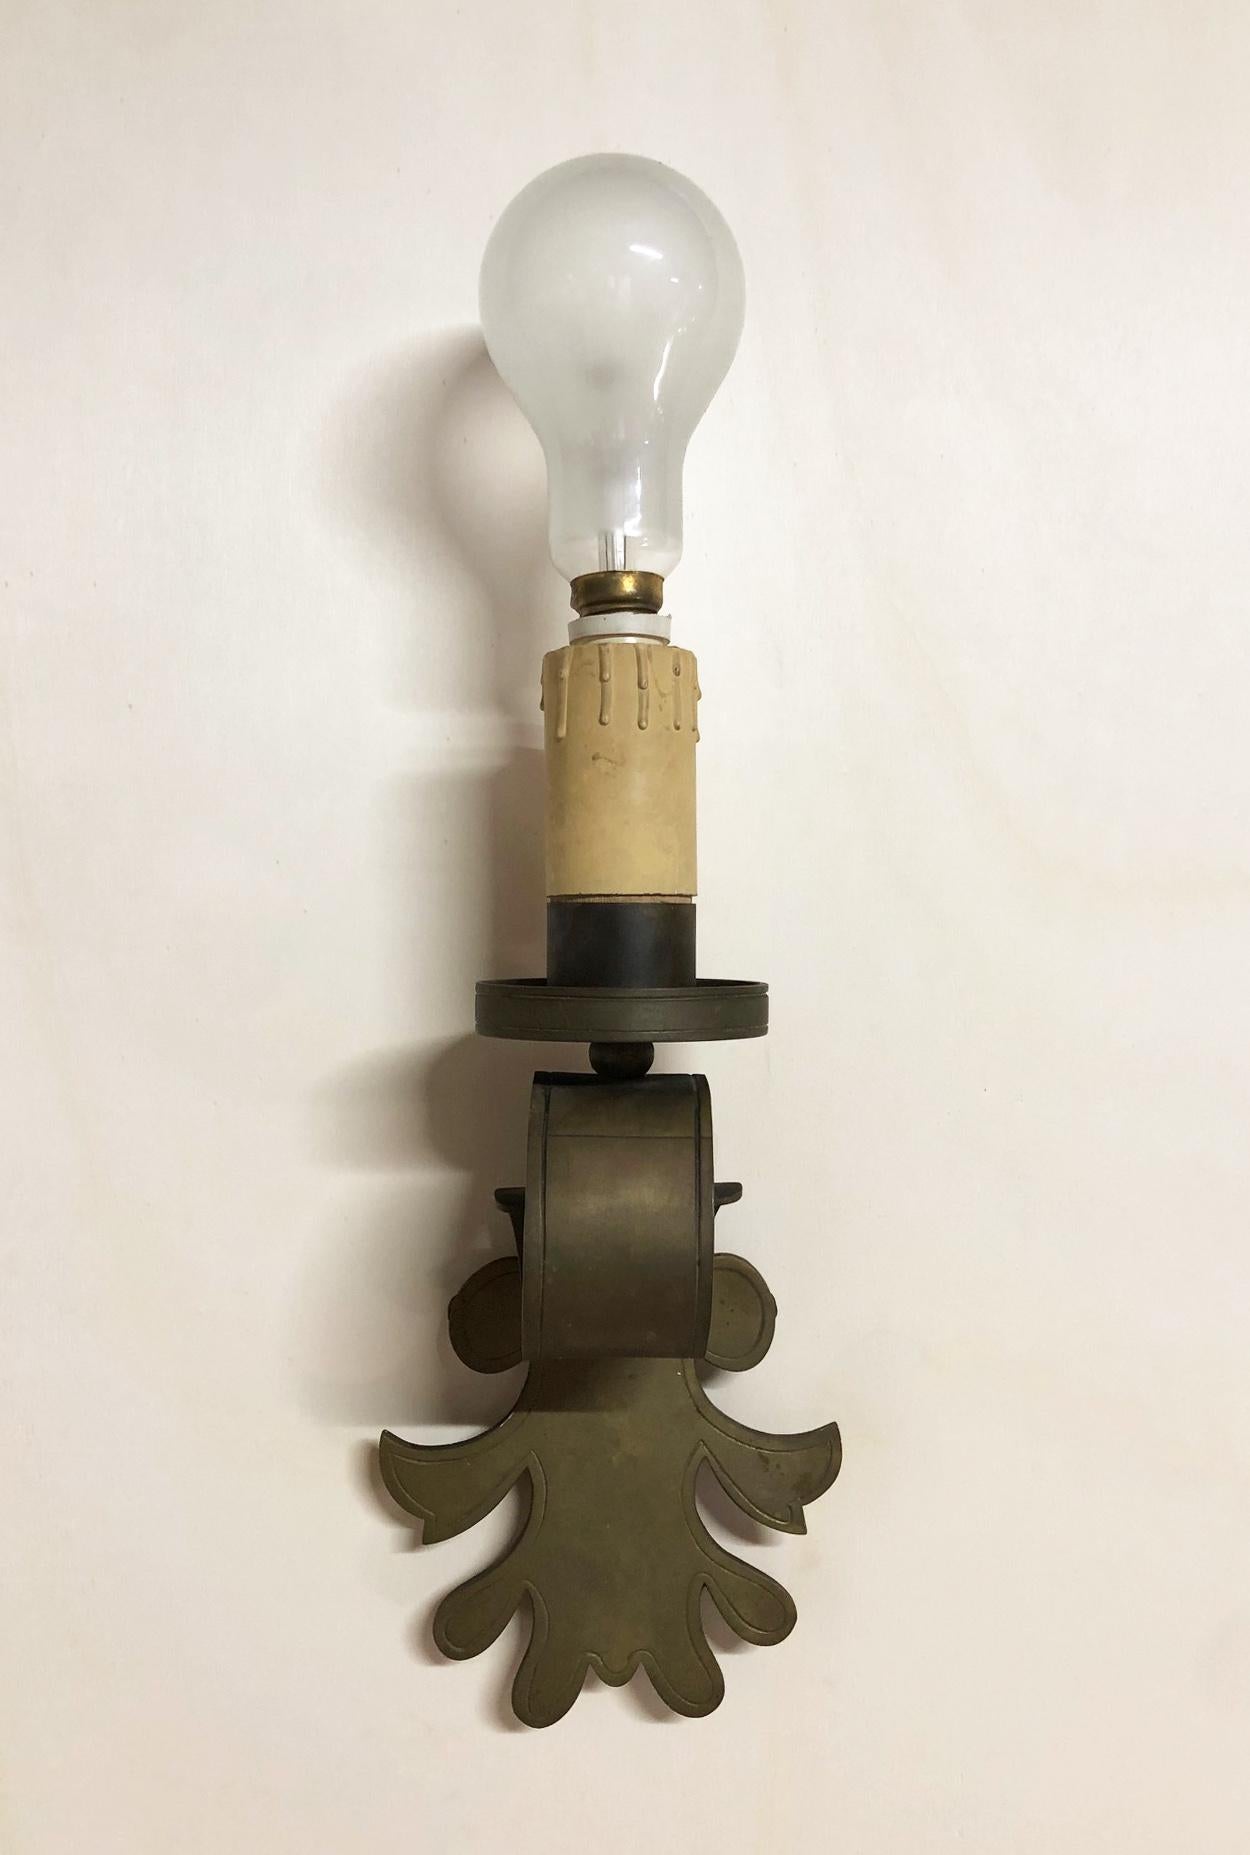 Heavy brass wall lamp with large lamp, original Italian from 1970s. 
On the back it is marked with an initials ED
It is possible to mount a lampshade, probably in the past it had one.
In working condition.
Equipped with original 20th century